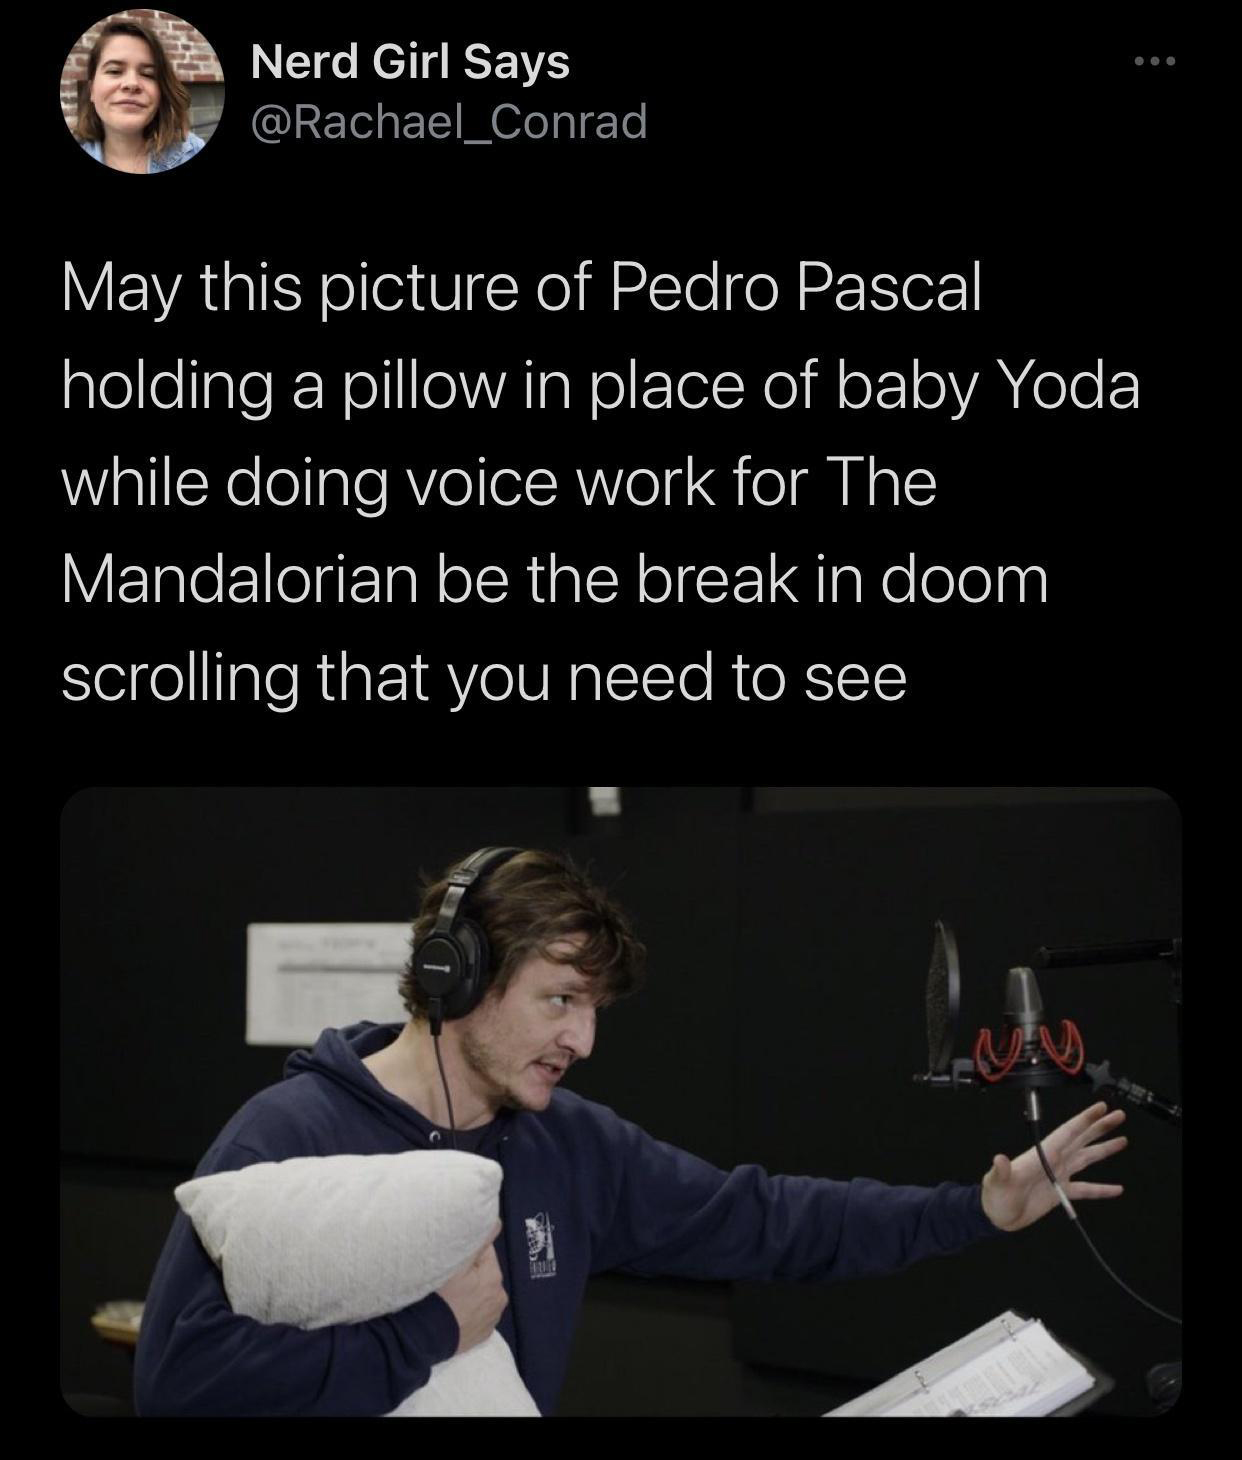 pedro pascal holding a pillow - Nerd Girl Says May this picture of Pedro Pascal holding a pillow in place of baby Yoda while doing voice work for The Mandalorian be the break in doom scrolling that you need to see Leur